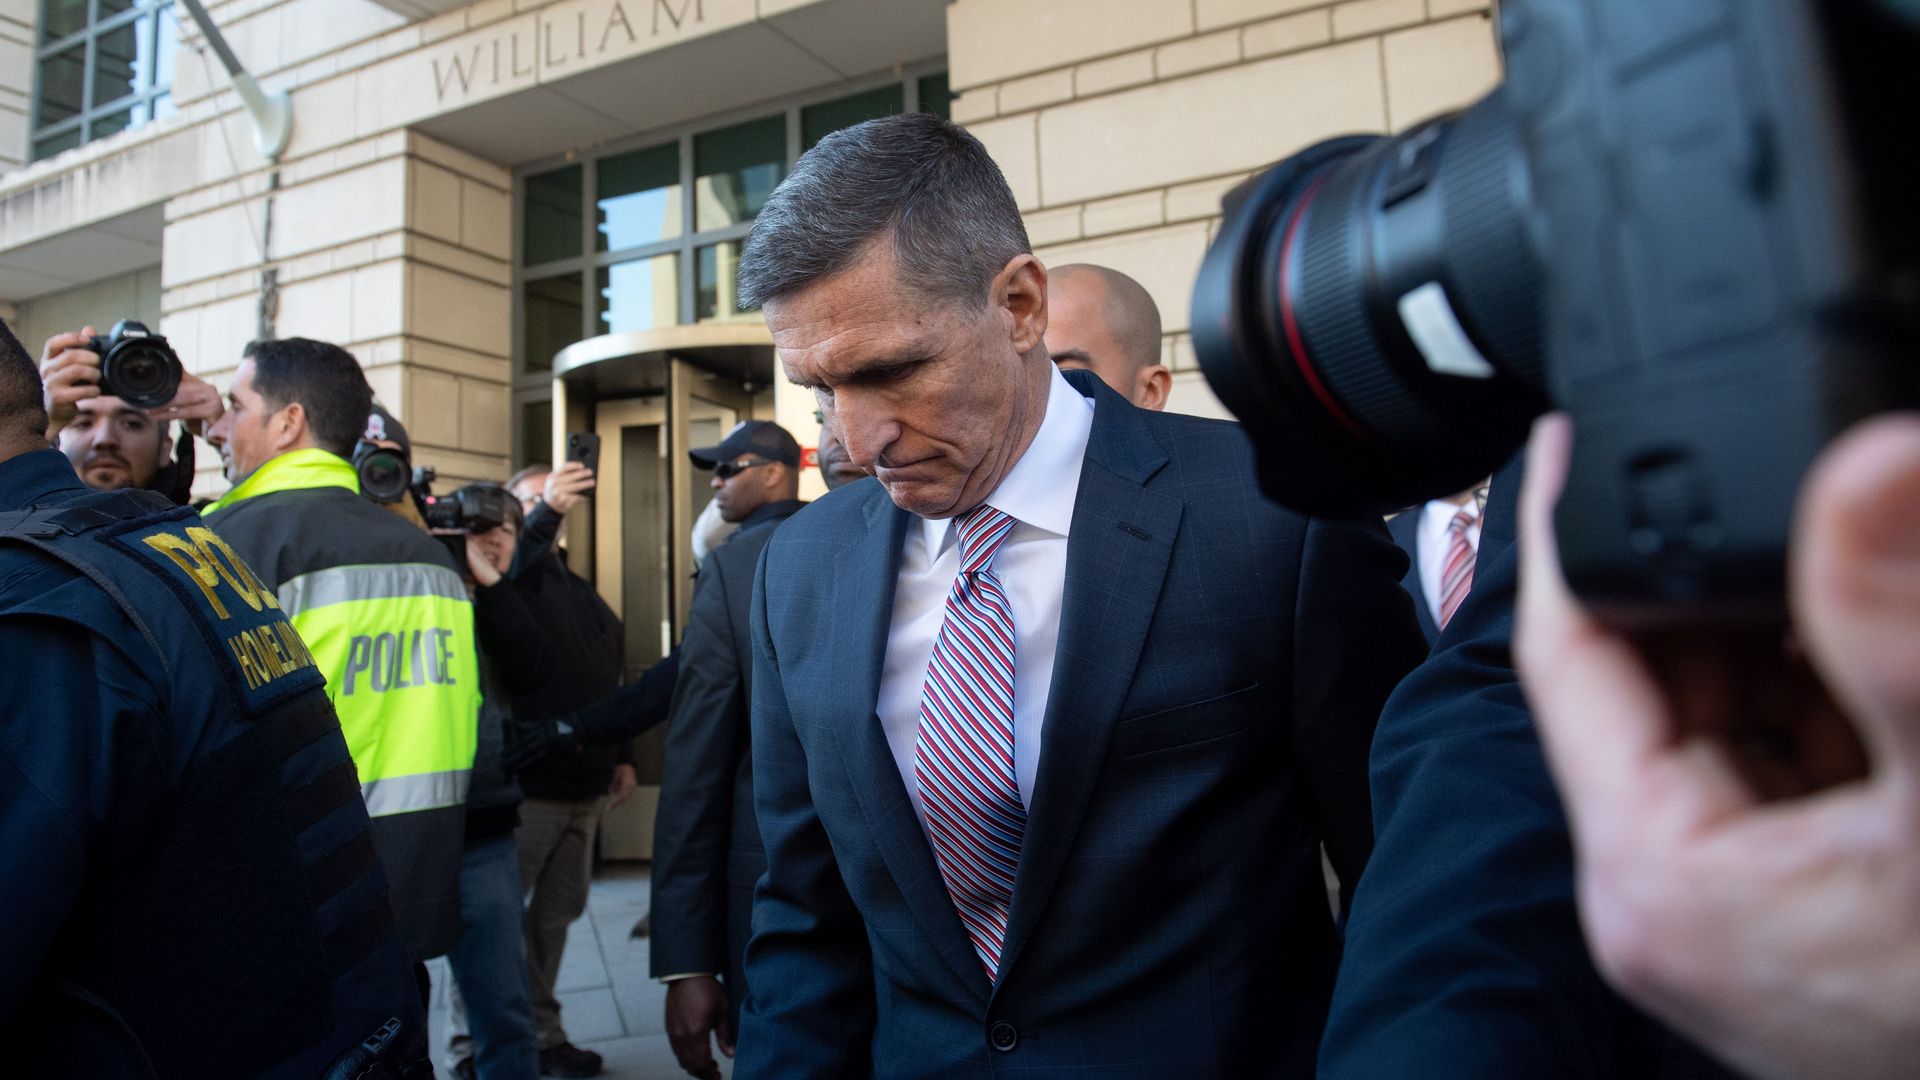 Michael Flynn assisted in Mueller's obstruction and WikiLeaks investigations - Axios1920 x 1080